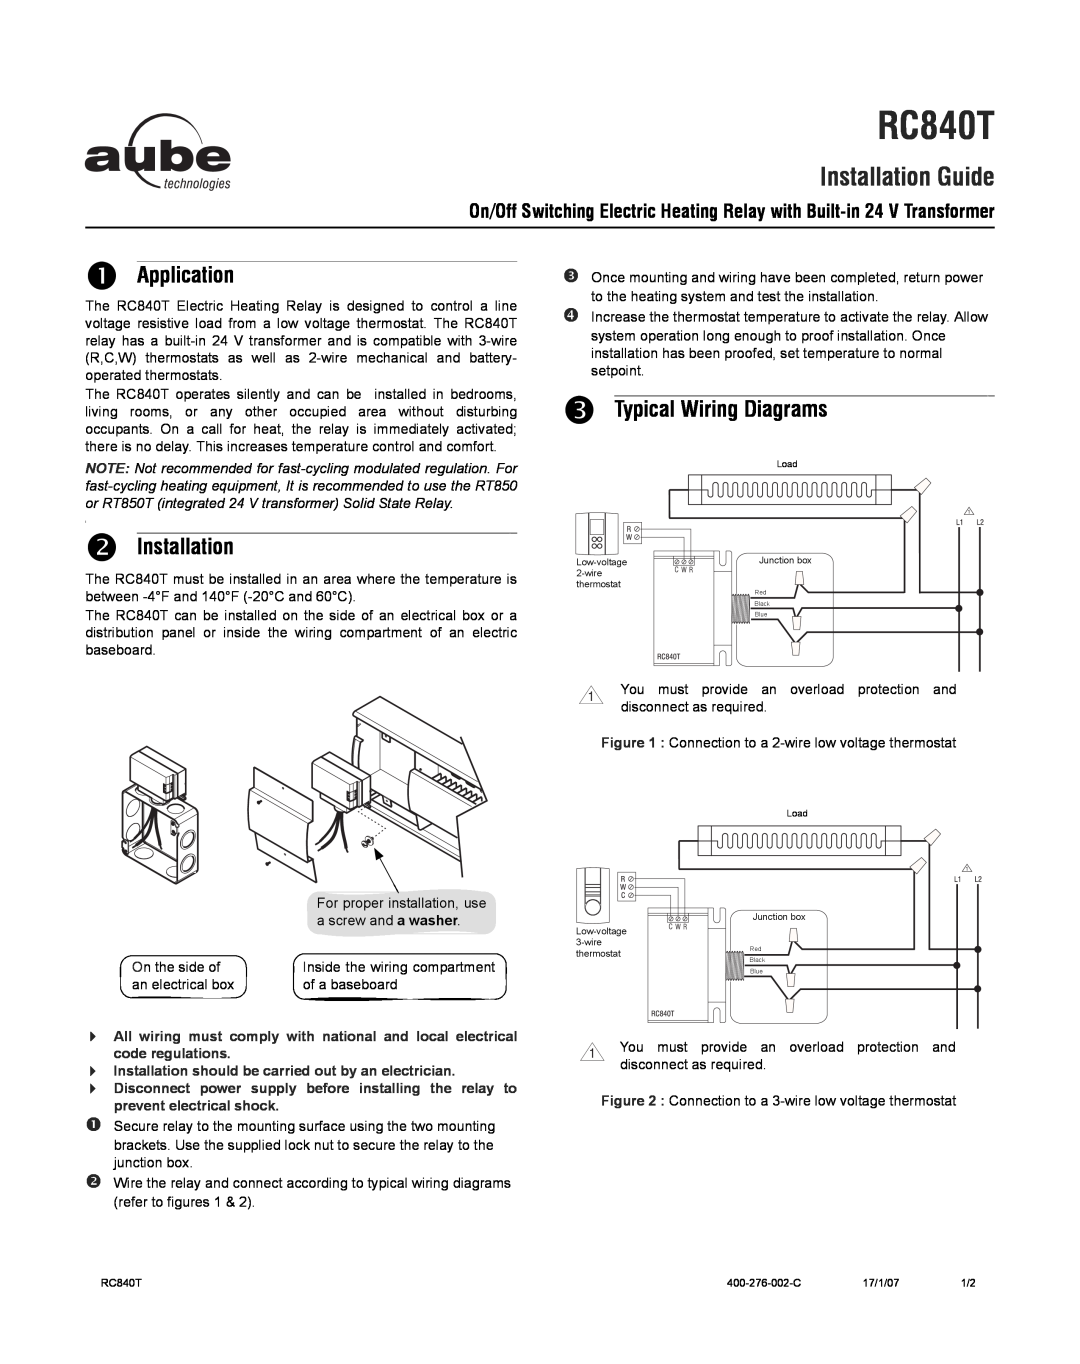 Aube Technologies RC840T manual n Application, p Typical Wiring Diagrams, o Installation, Installation Guide 